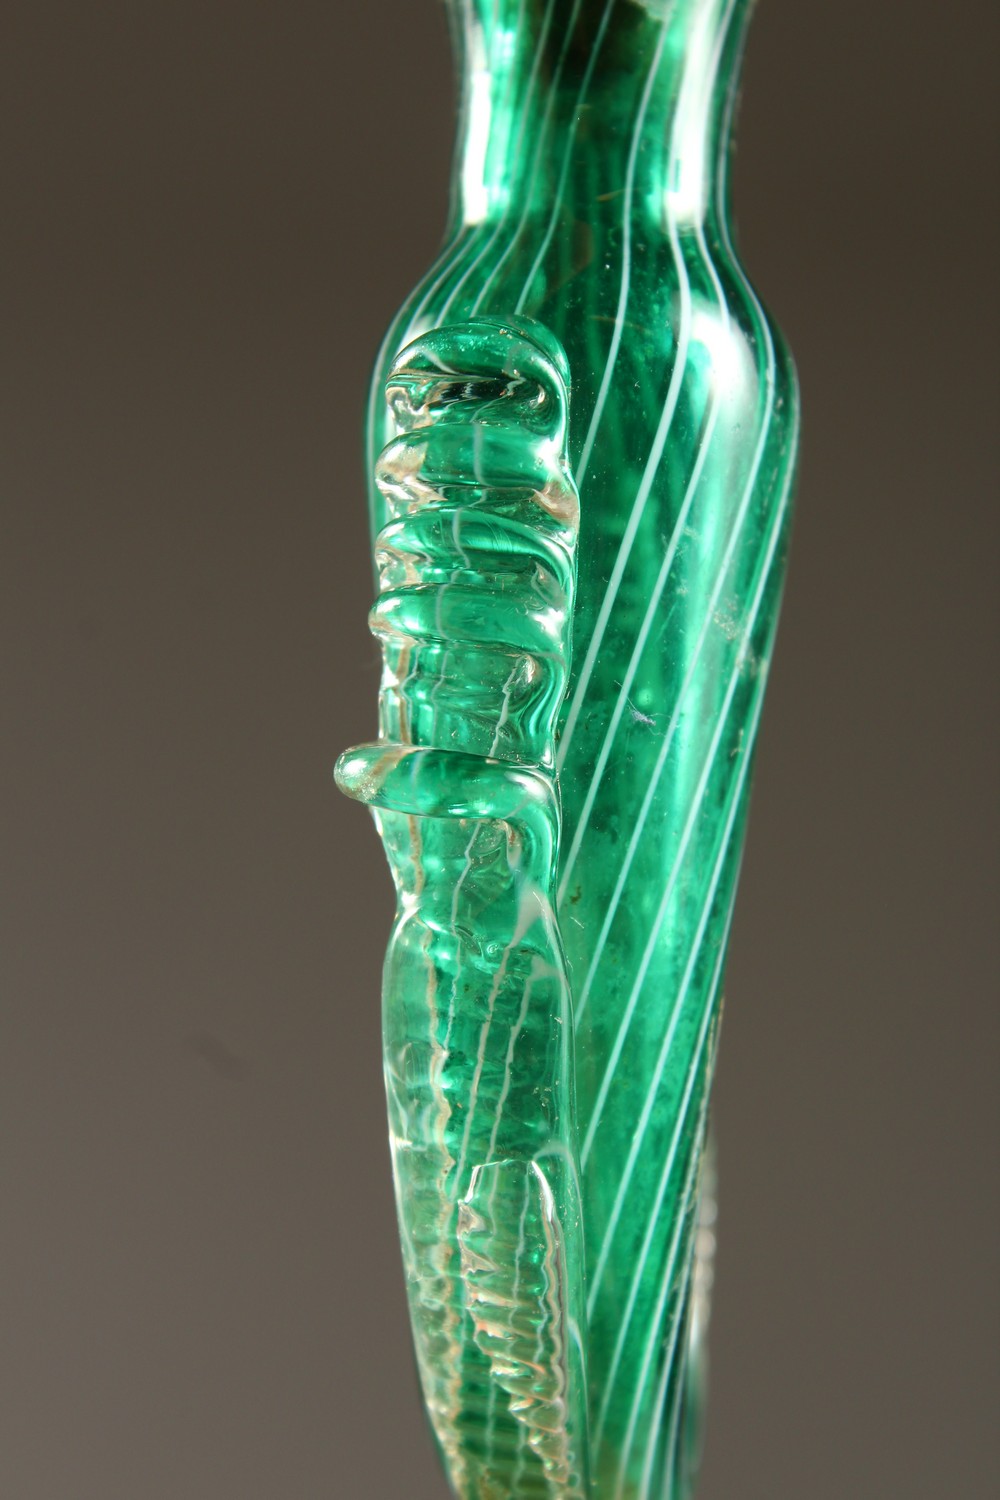 AN ITALIAN GREEN GLASS SPIRAL SHAPED SCENT BOTTLE with cork stopper. 7.5cms long. - Image 2 of 7